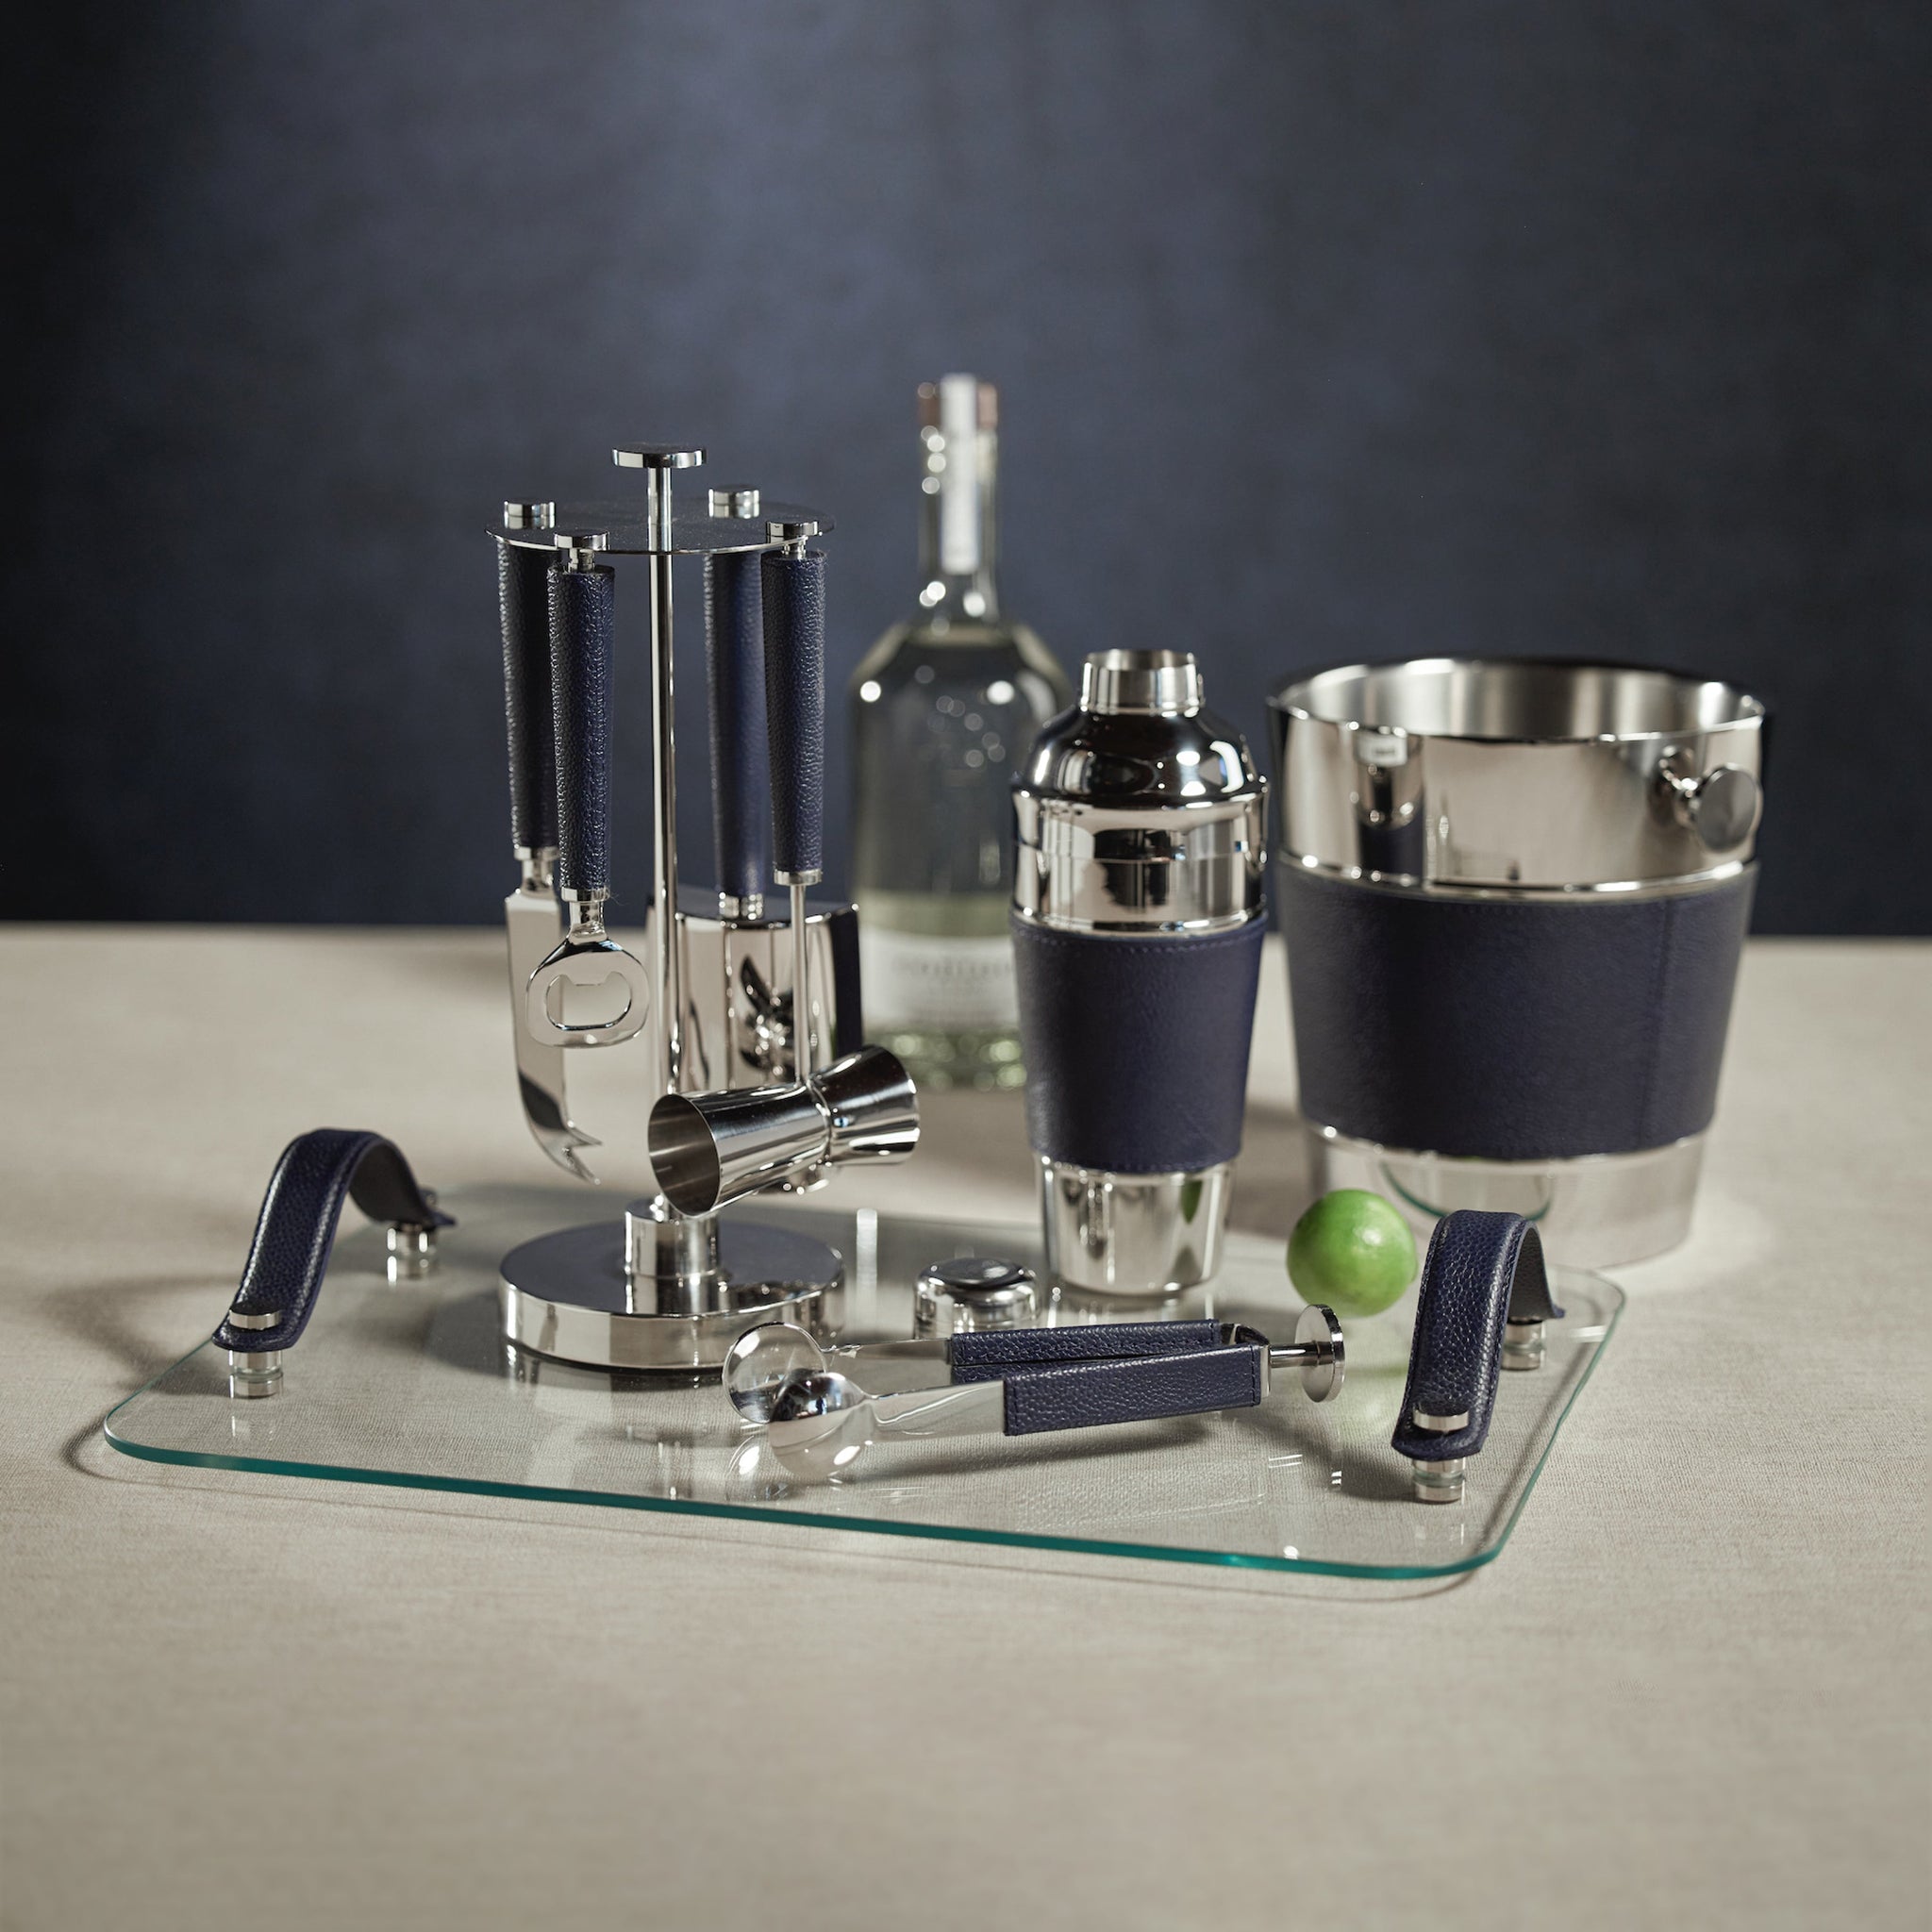 Laguna Nickle and Leather Drinkware set - Benzie Gifts